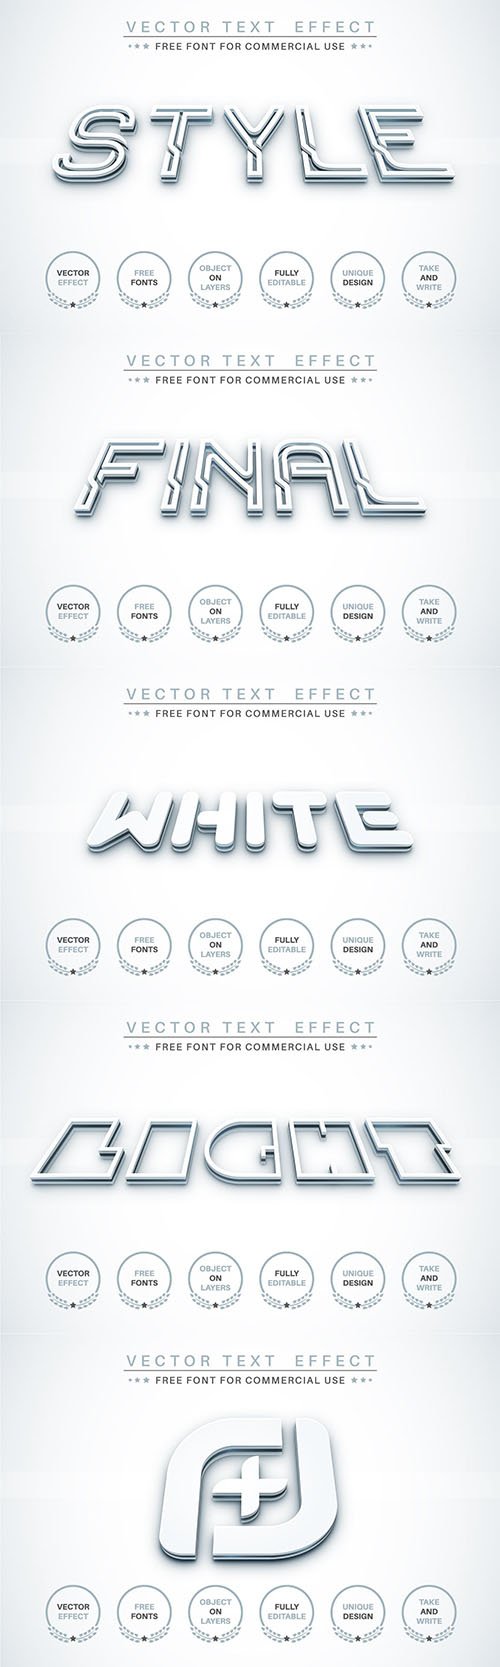 3D White - editable text effect, font style